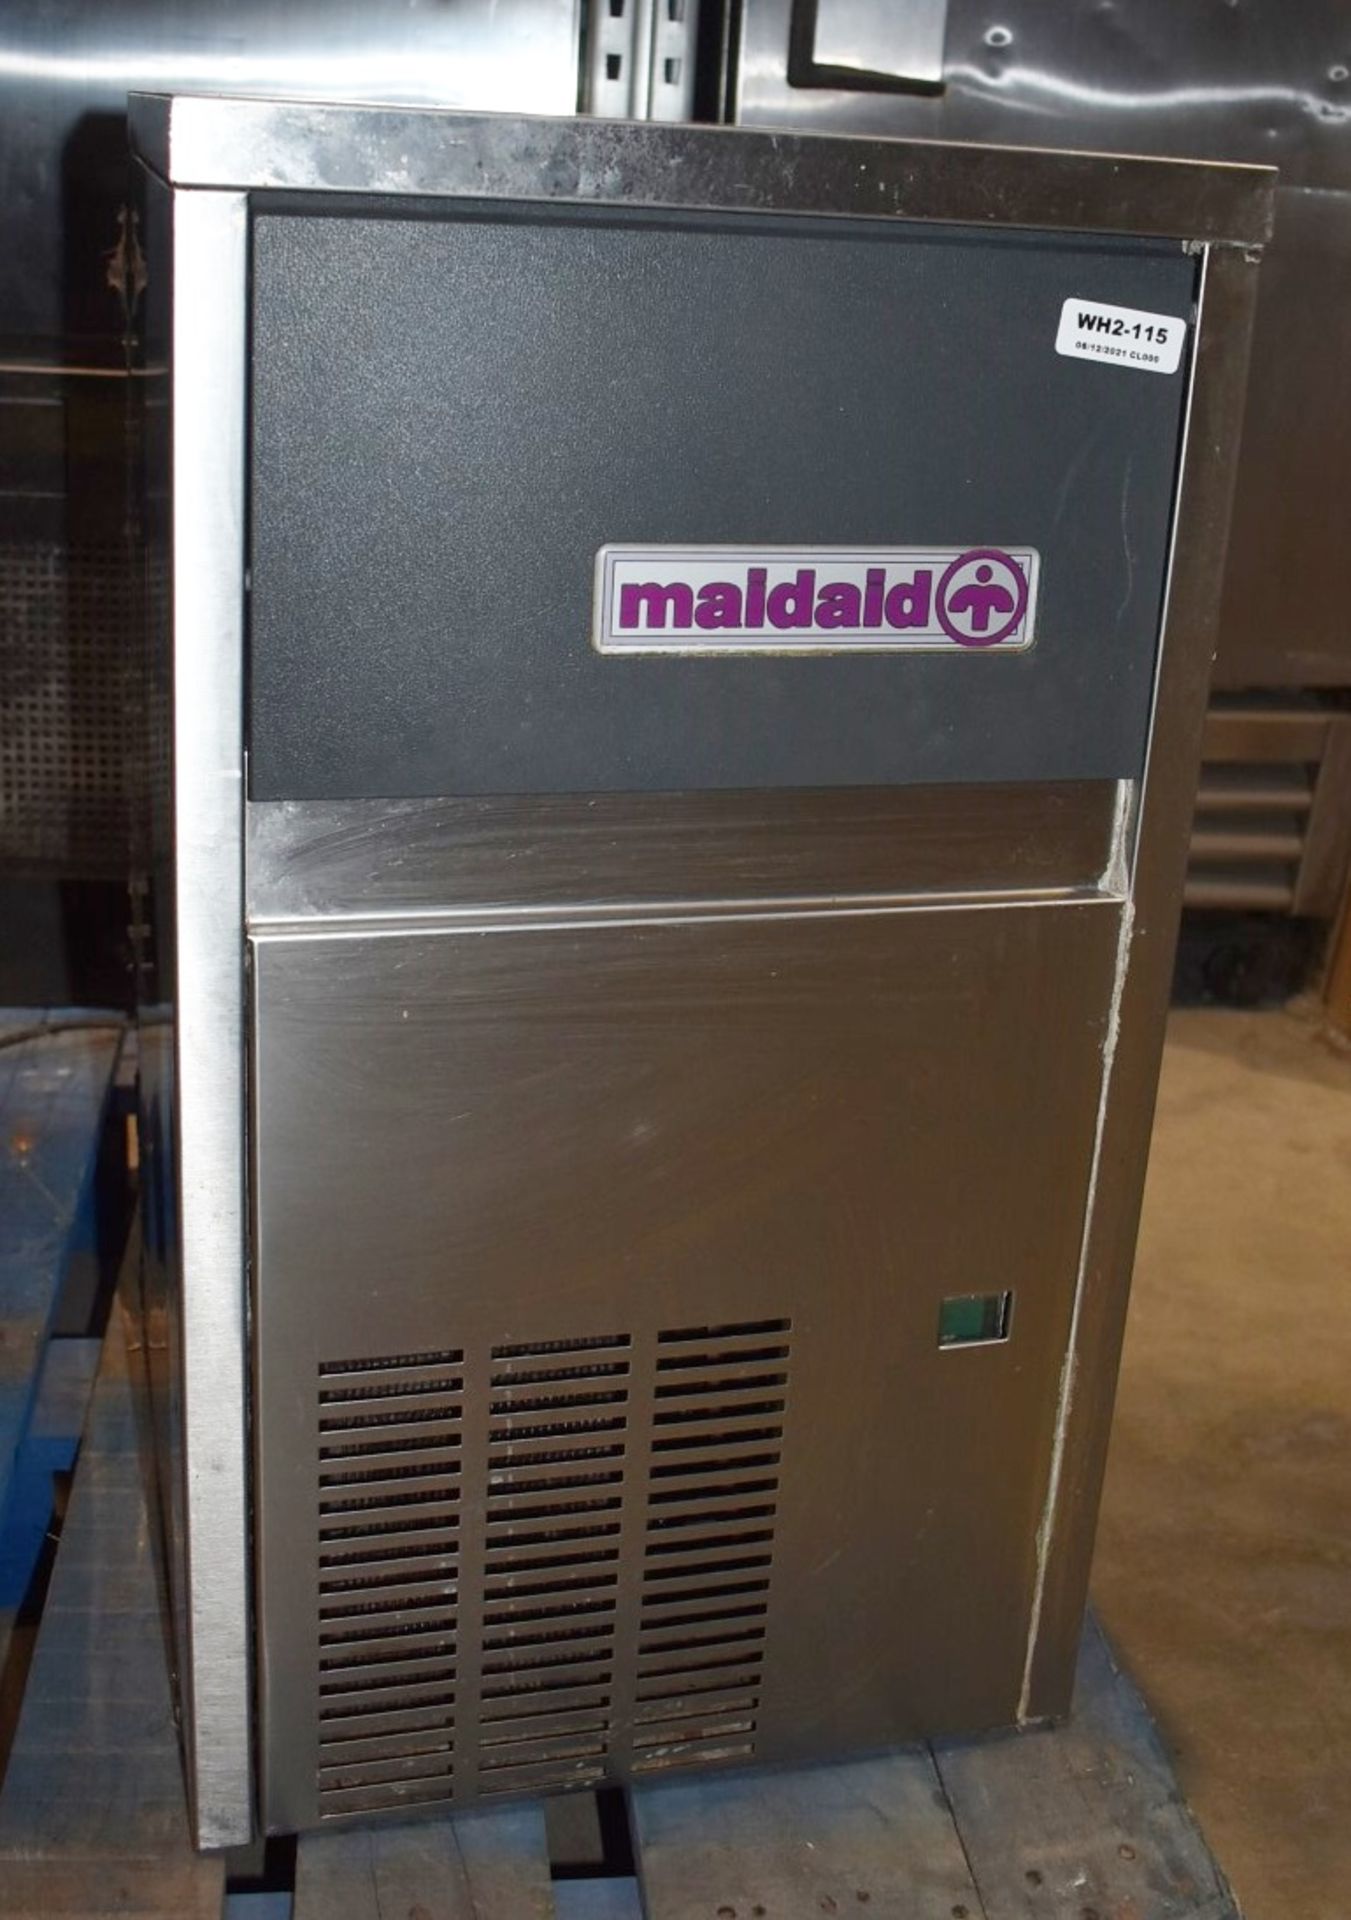 1 x Maidaid M30-10 Countertop Ice Machine With Stainless Steel Exterior - RRP £975 - Ref: WH2-115 - Image 4 of 9